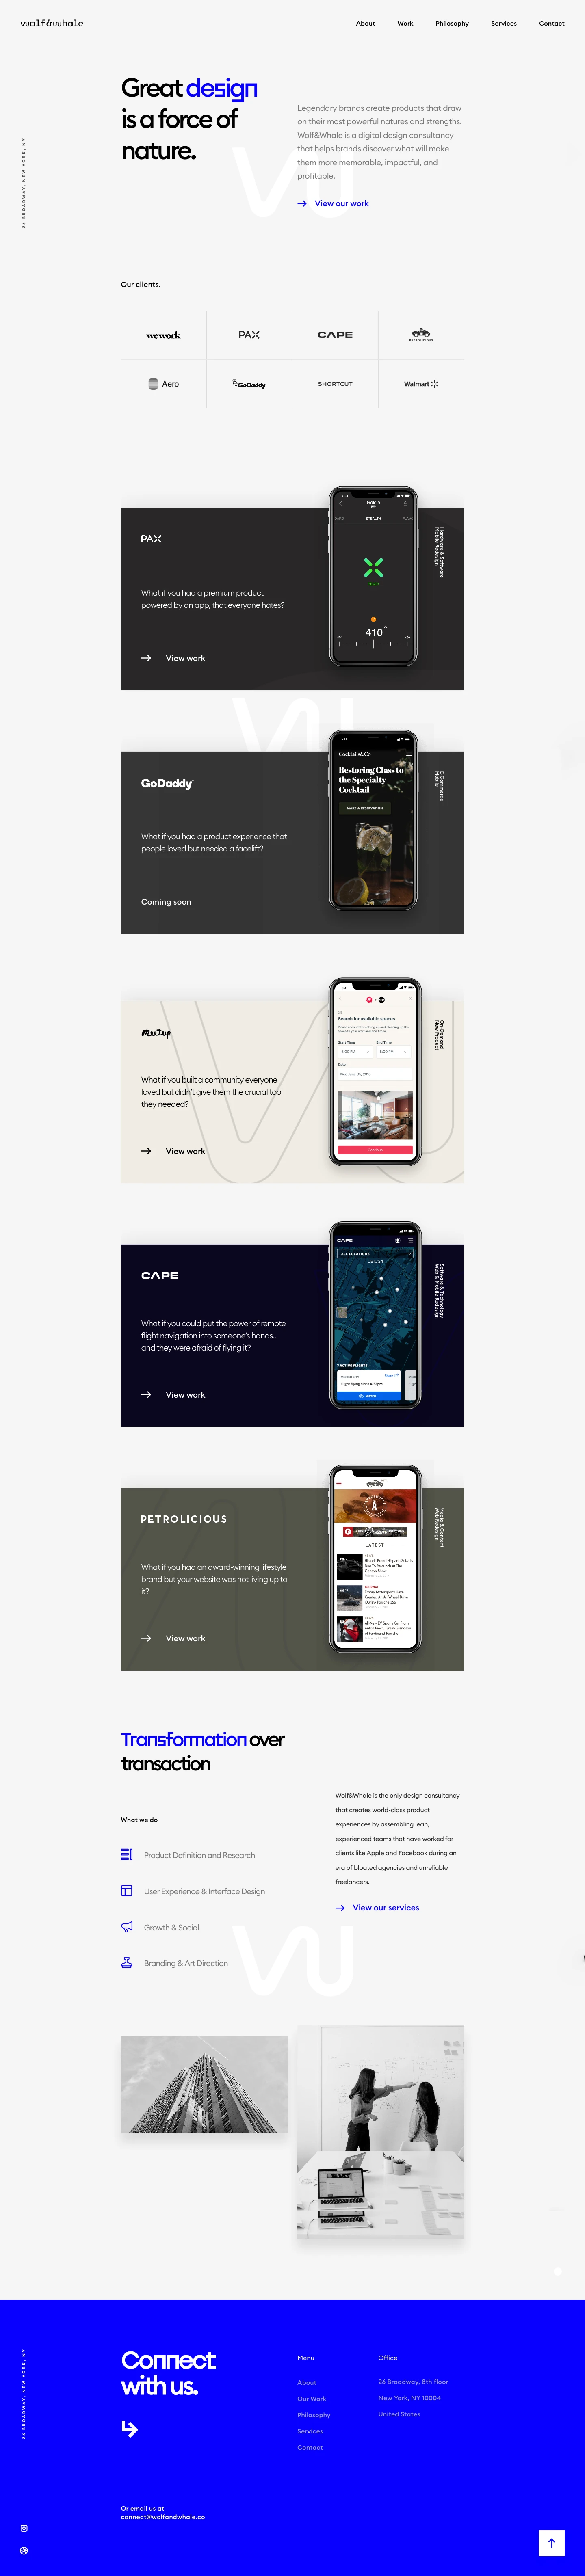 Wolf & Whale Landing Page Example: Legendary brands create products that draw on their most powerful natures and strengths. Wolf & Whale is a digital design consultancy that helps brands discover what will make them more memorable, impactful, and profitable.